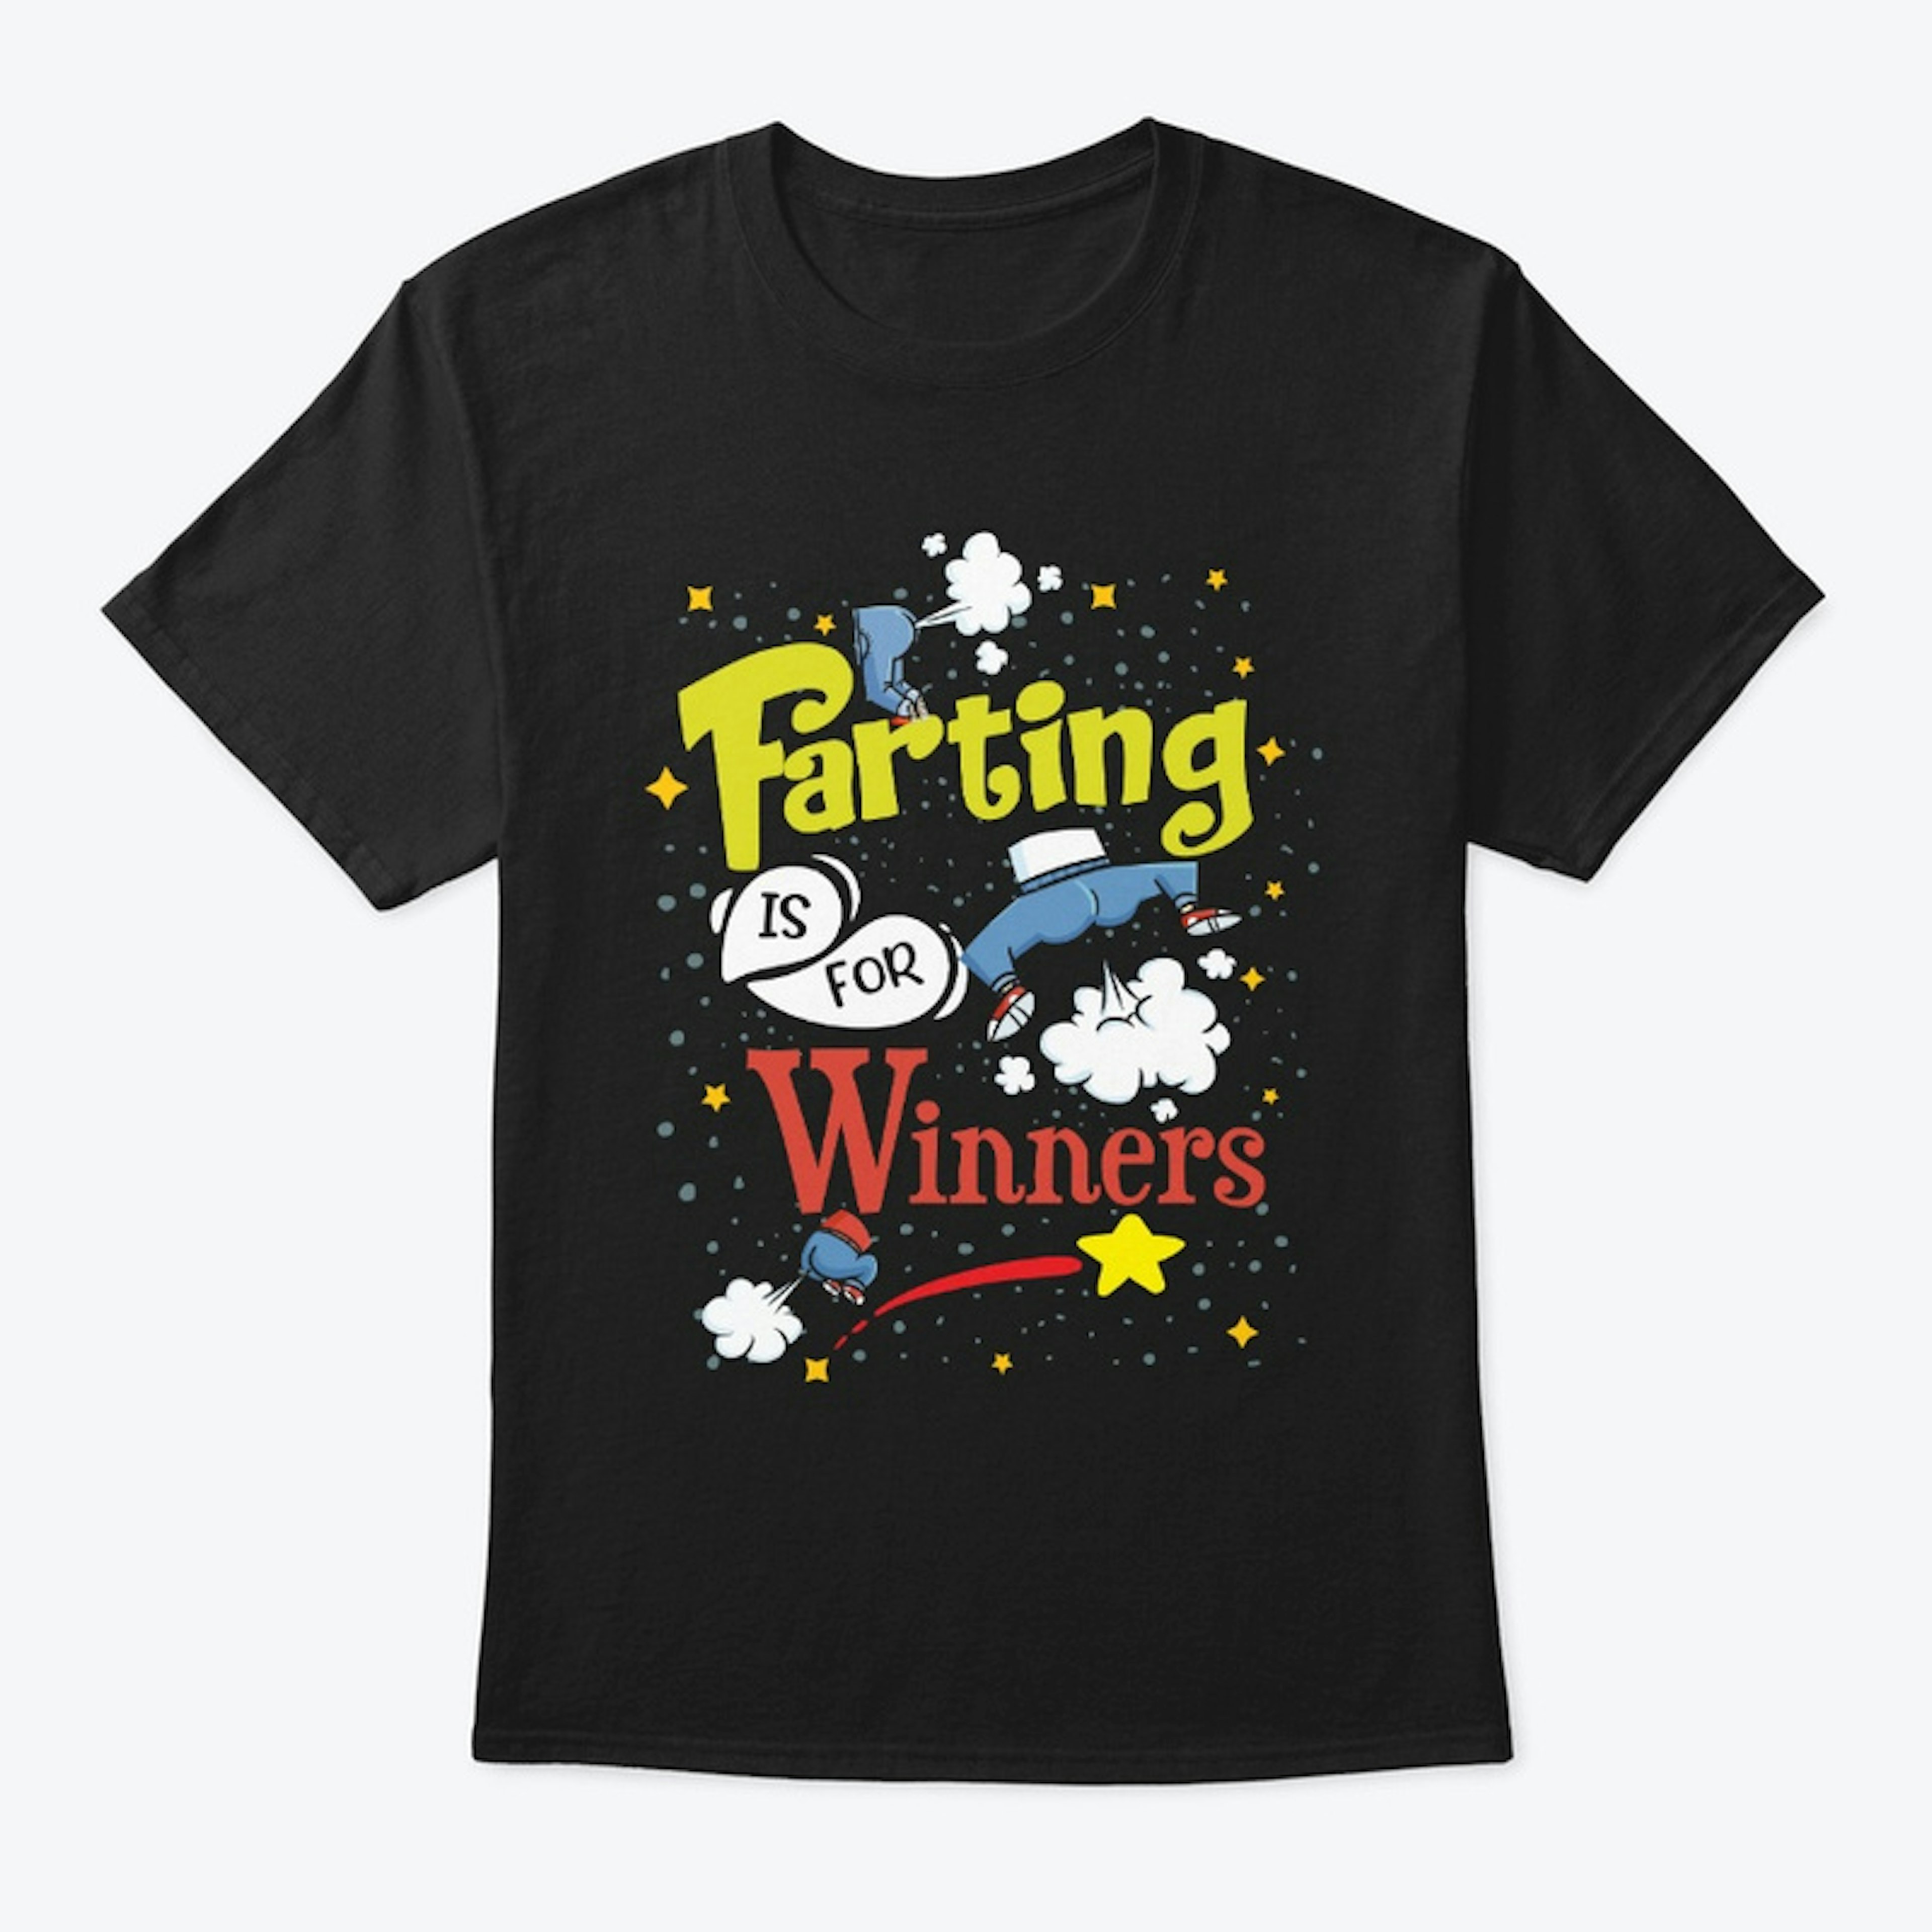 Farting is for Winners